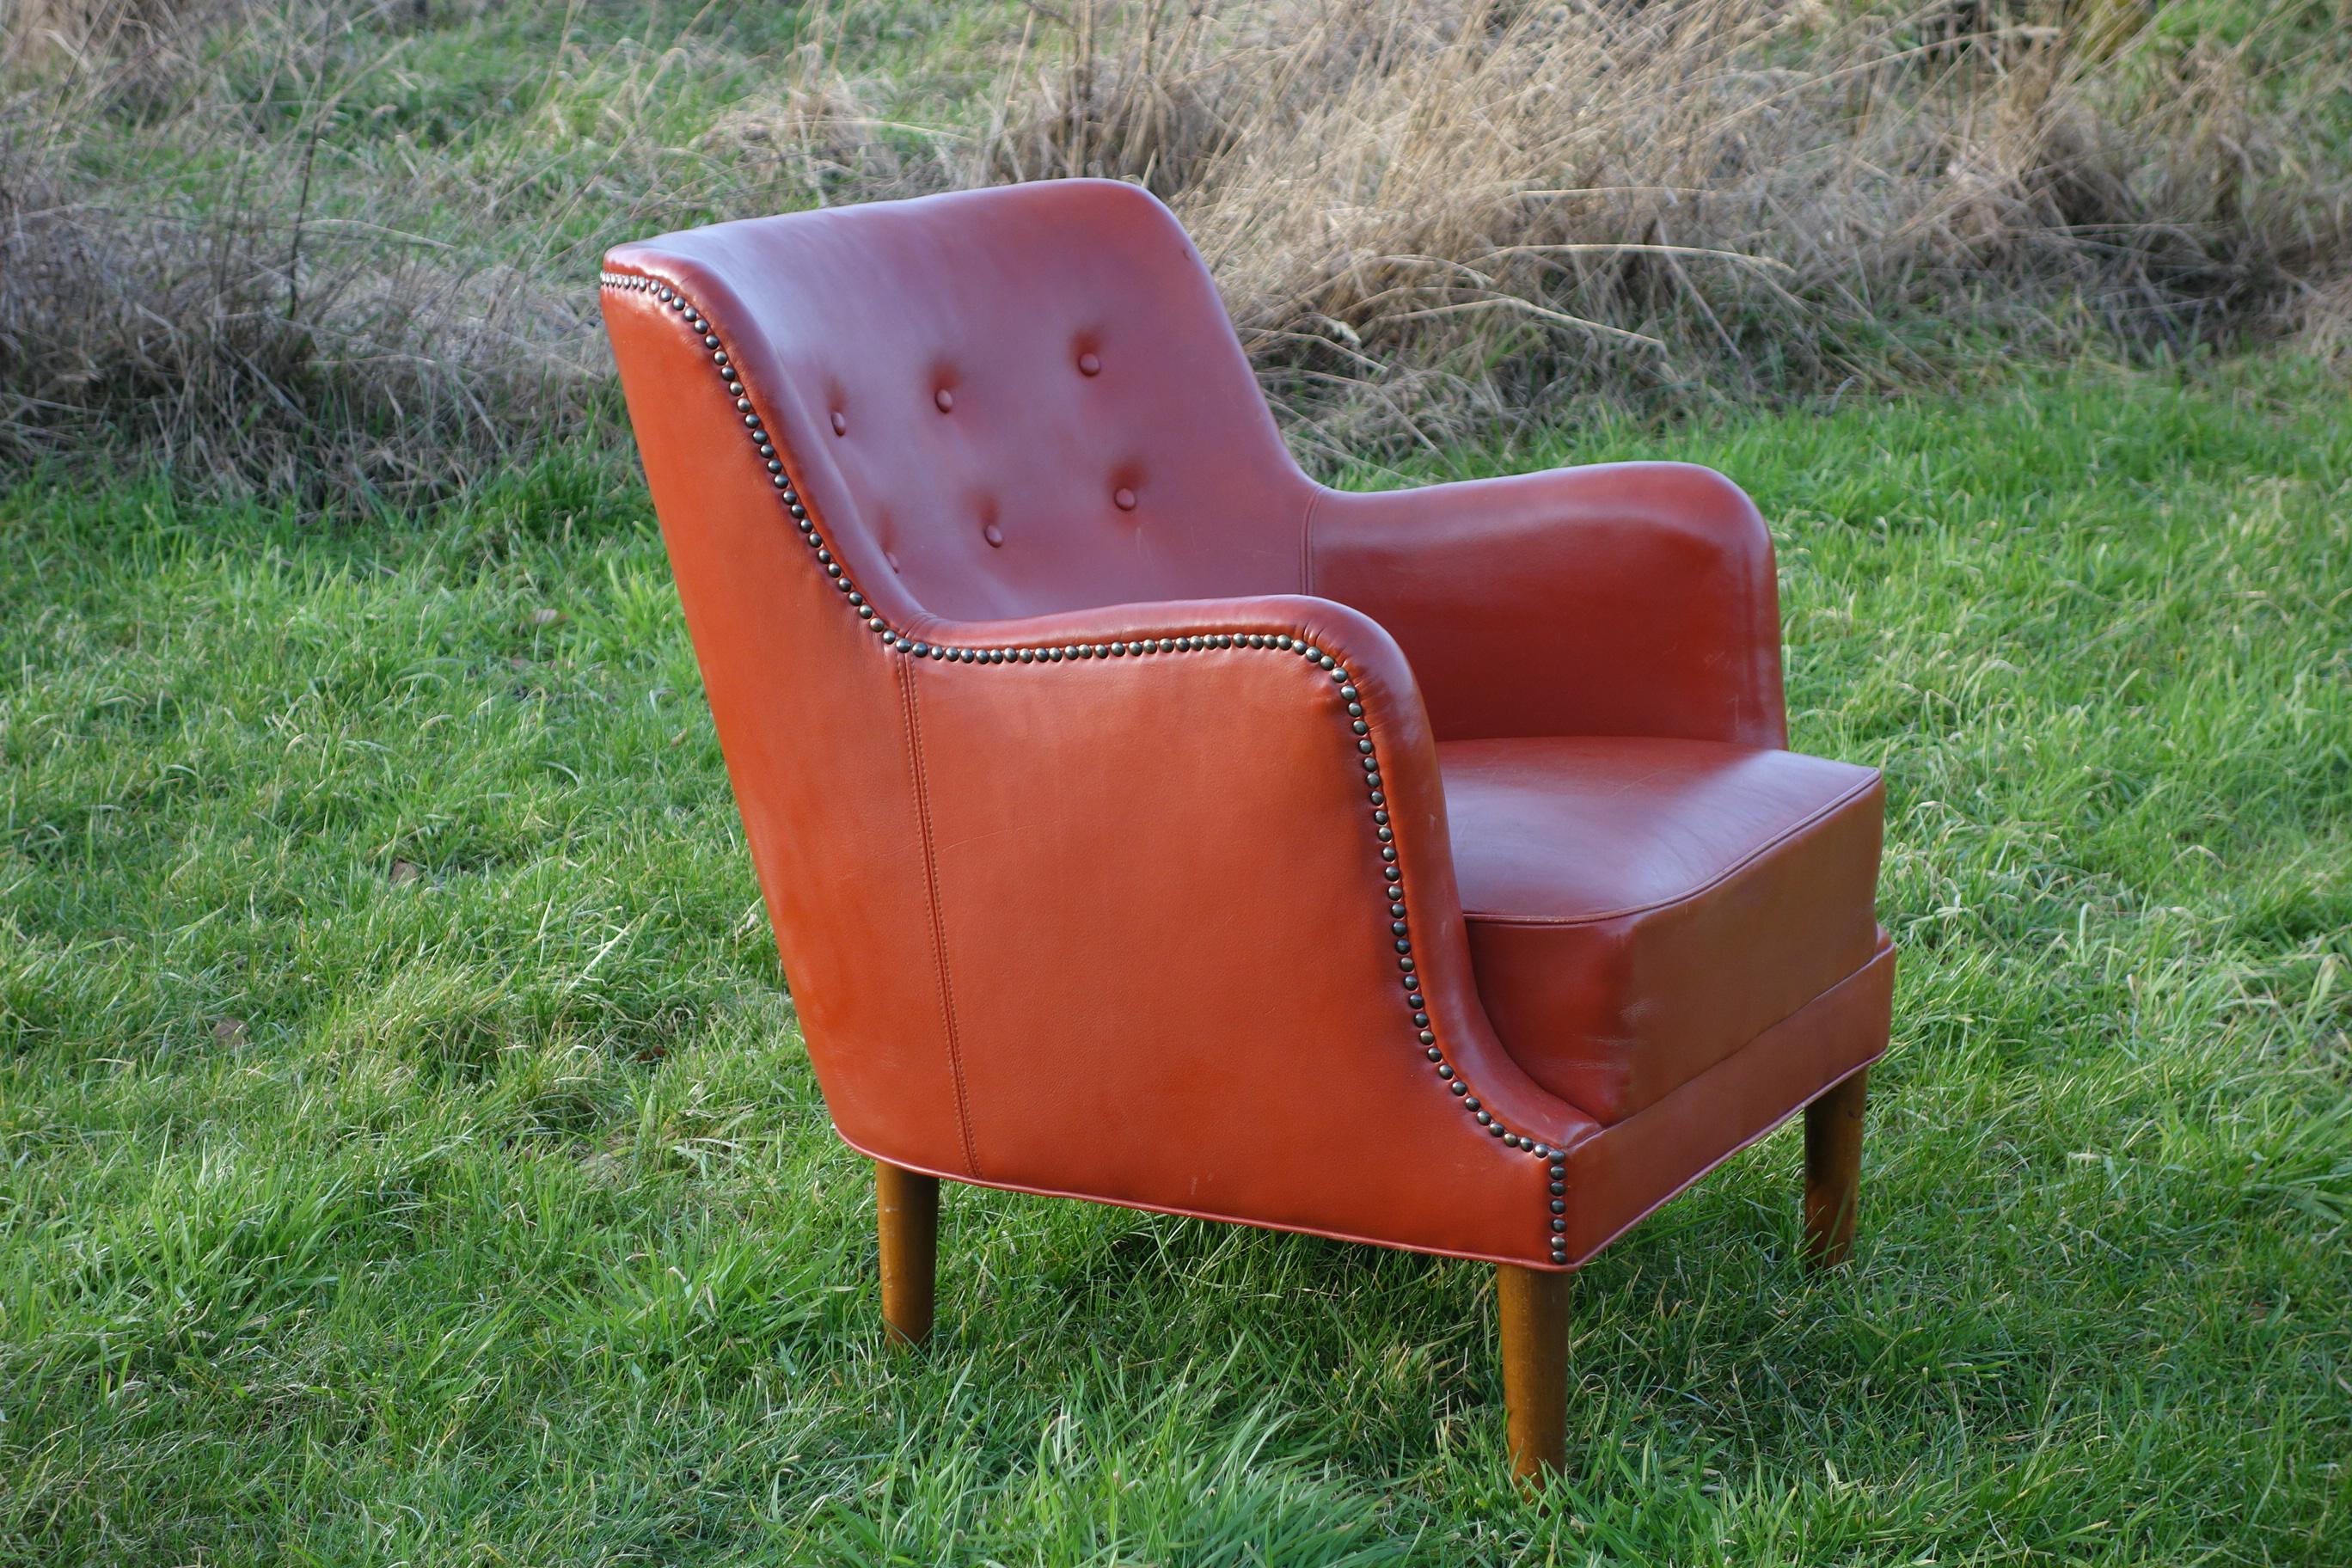 A beautiful Danish leather chair from the 1940s. It is in a strong leather and has a nice shiny patina. Low and organically shaped with brass nails along the edges. It is very comfortable to sit in. It has round legs, which is not often seen on this